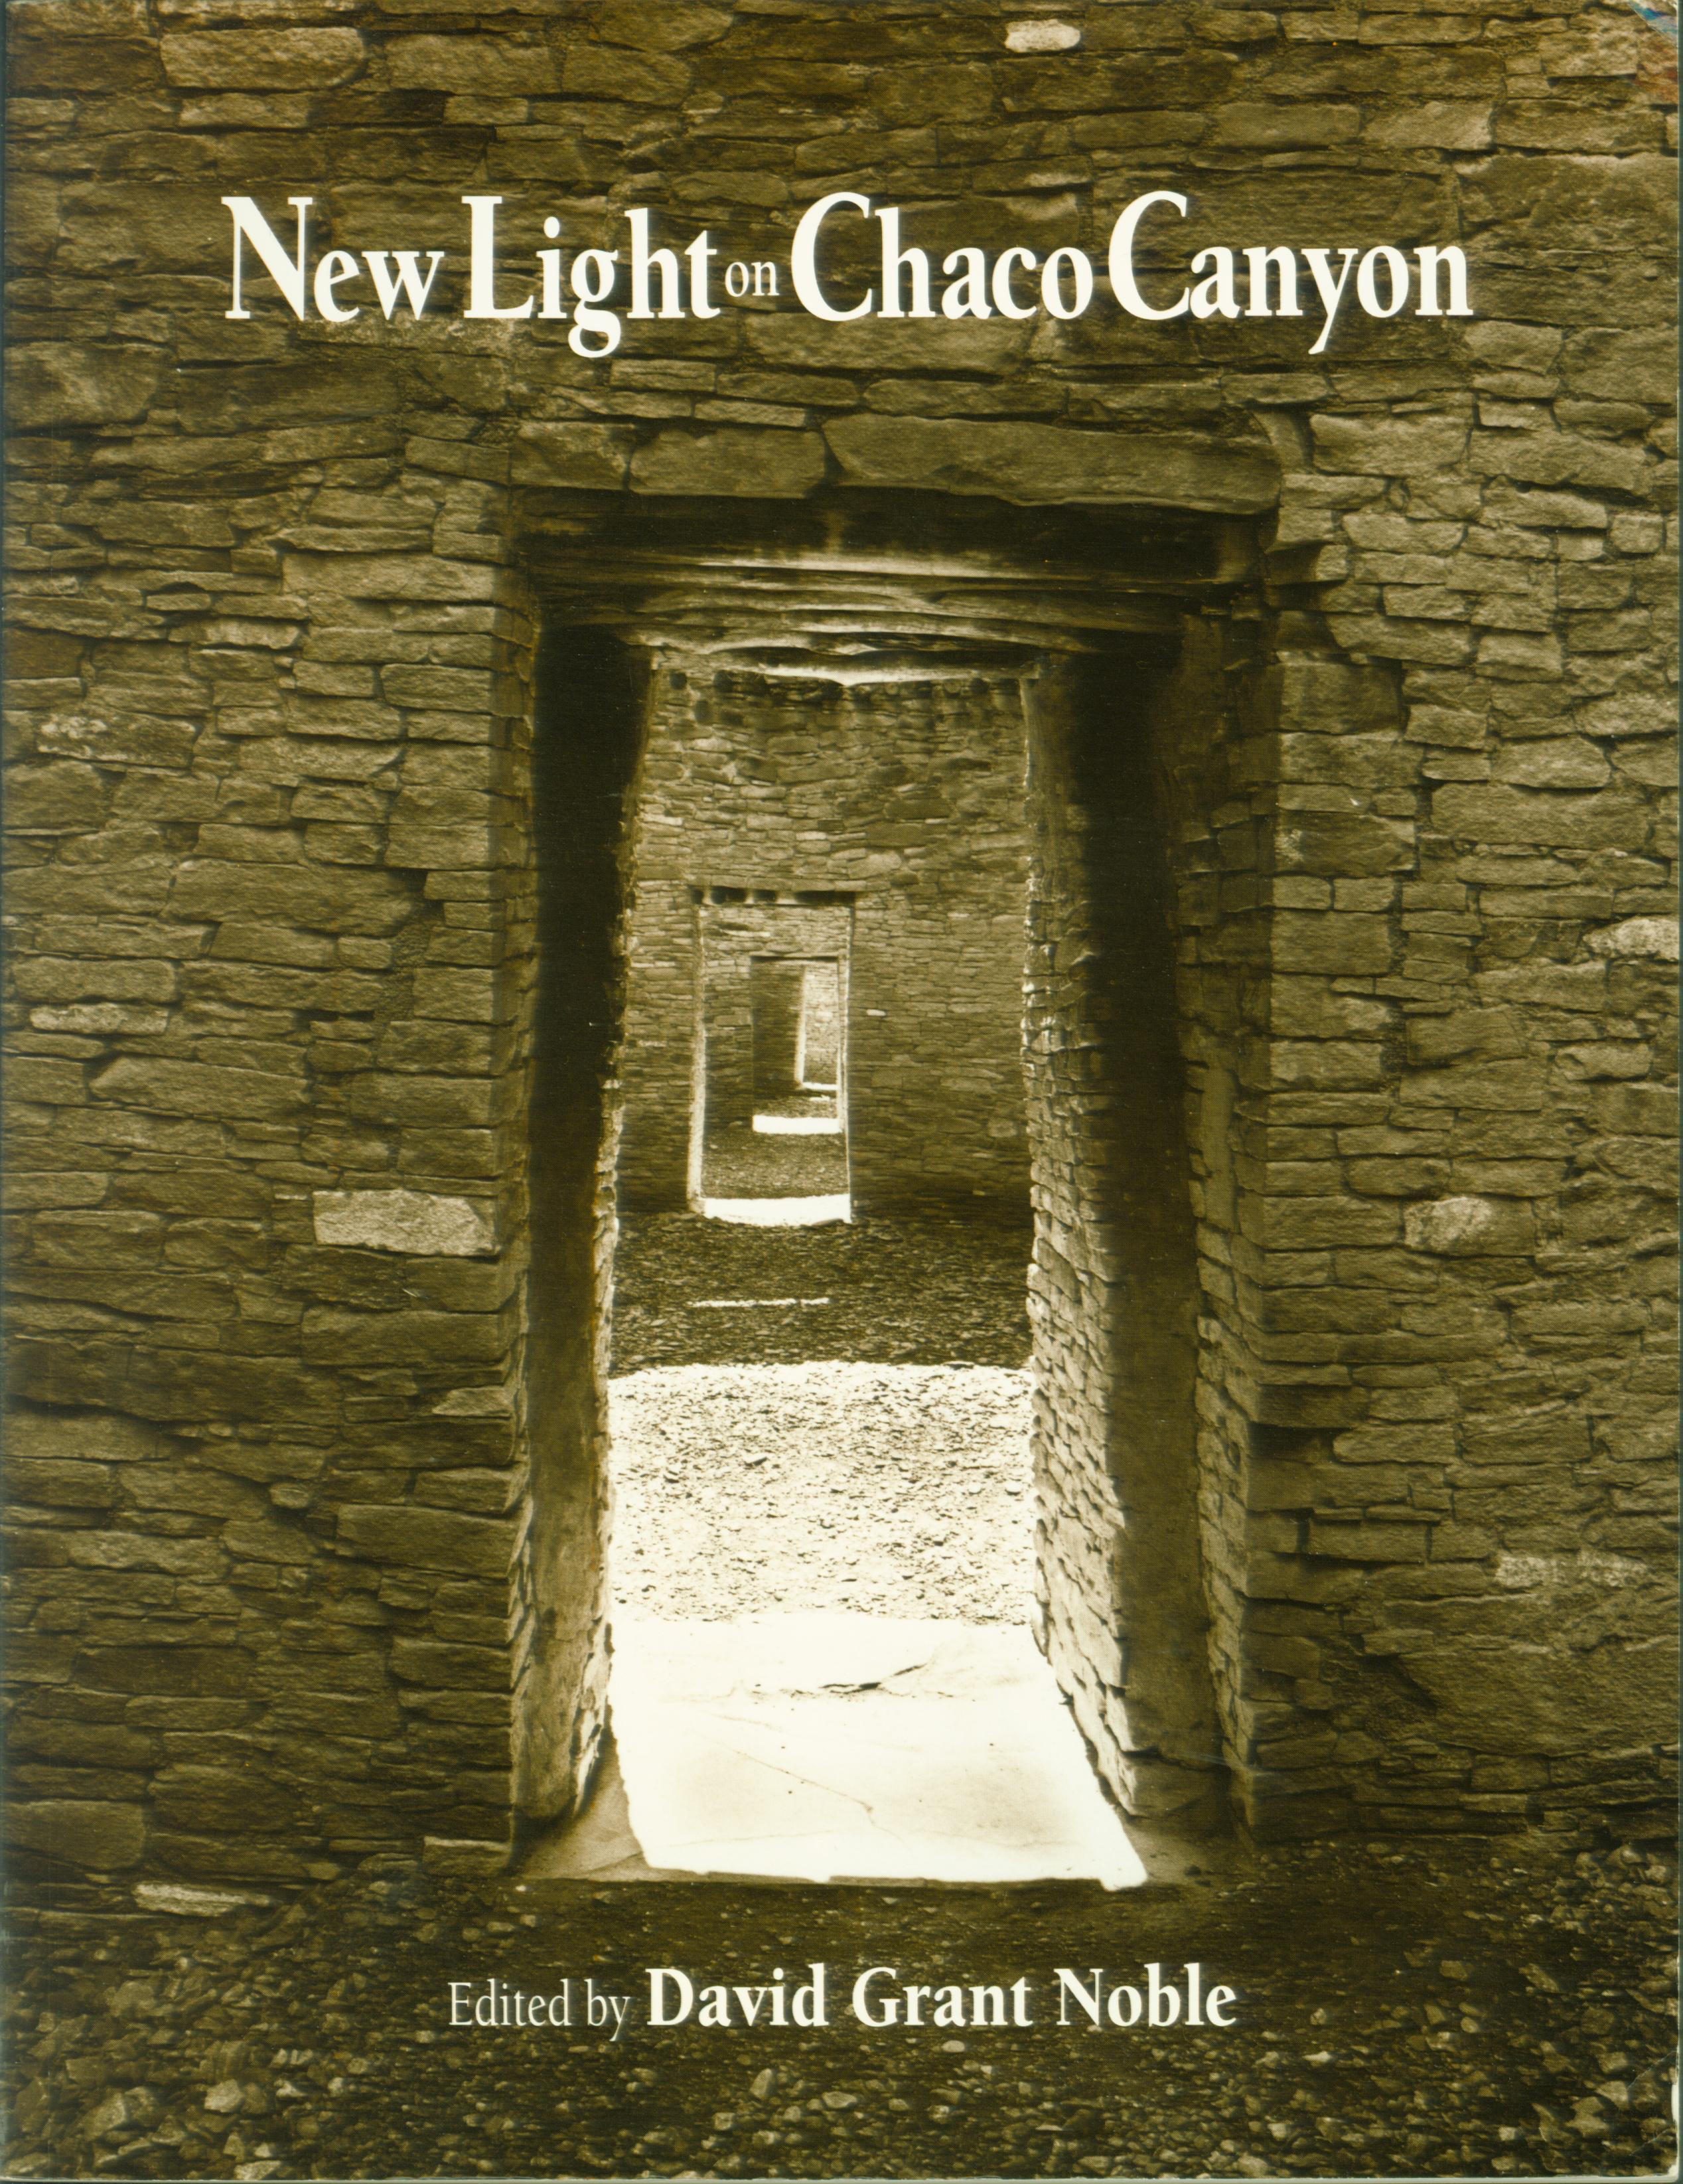 NEW LIGHT ON CHACO CANYON